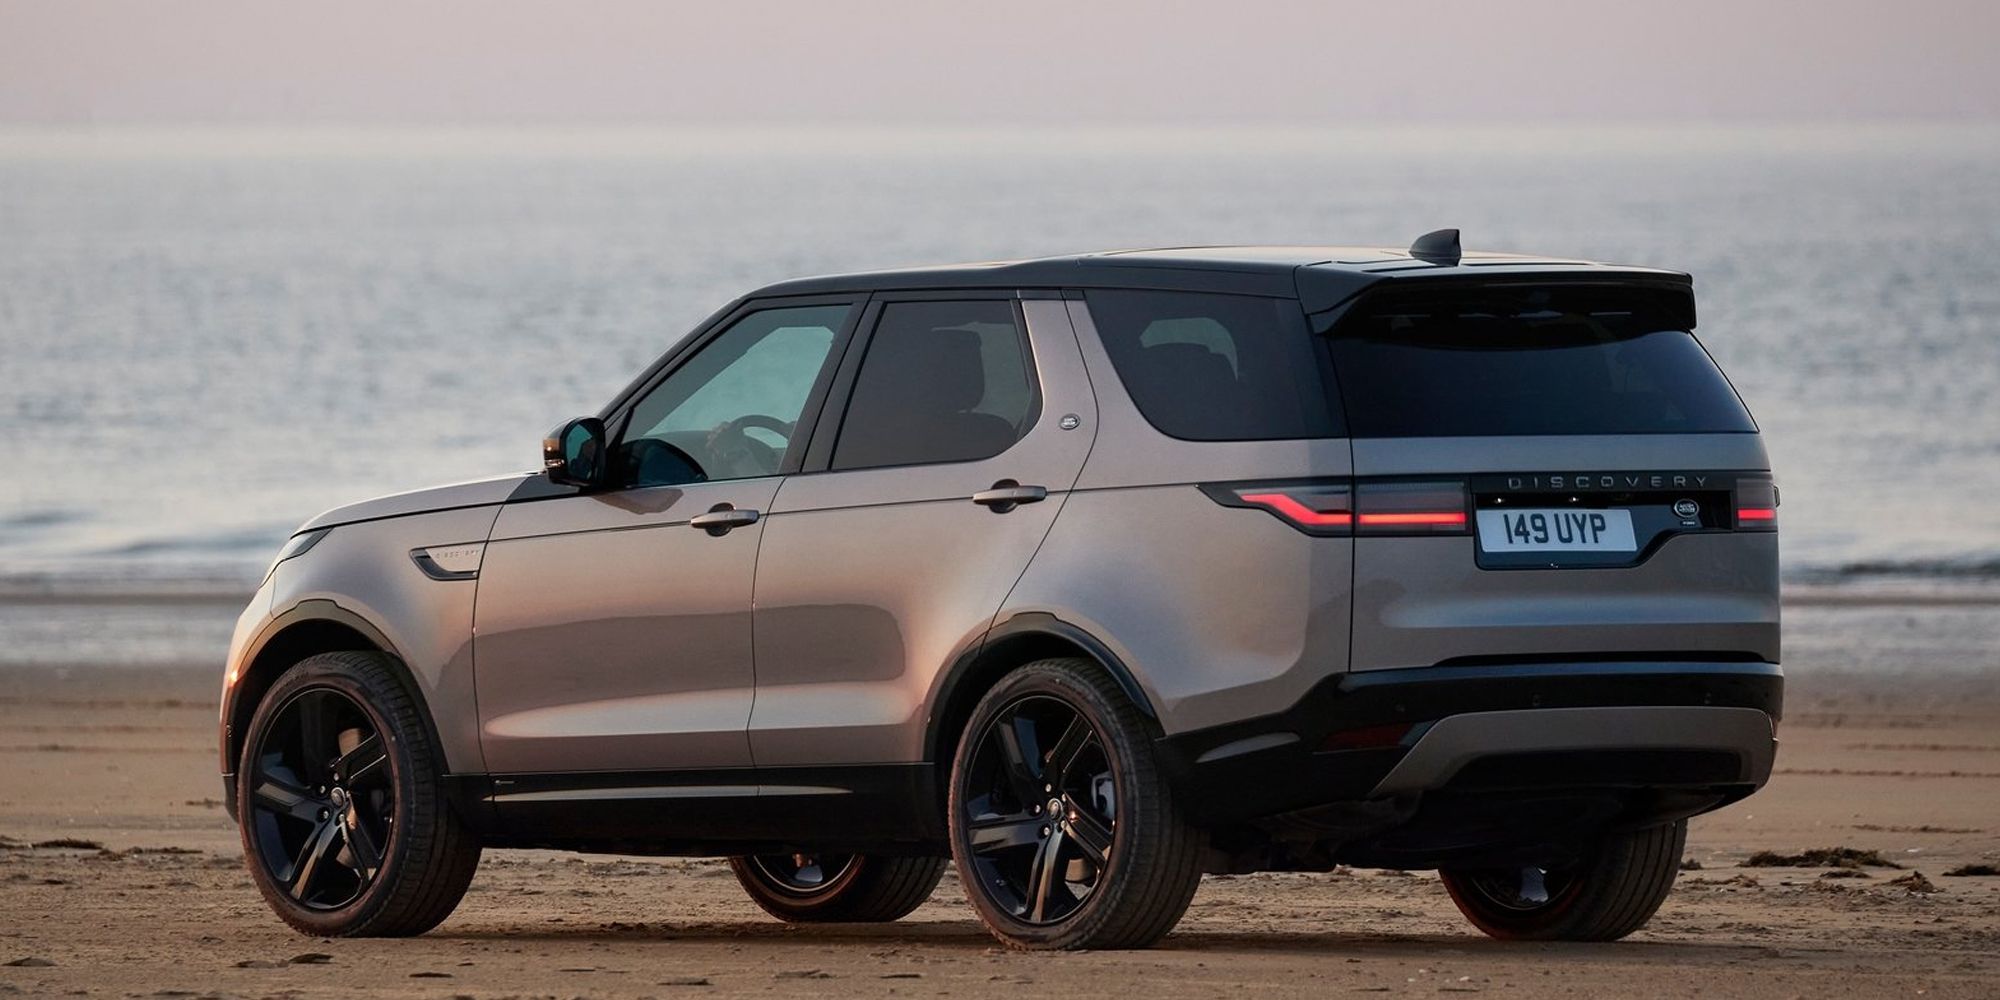 Rear 3/4 view of a Discovery on sand, static